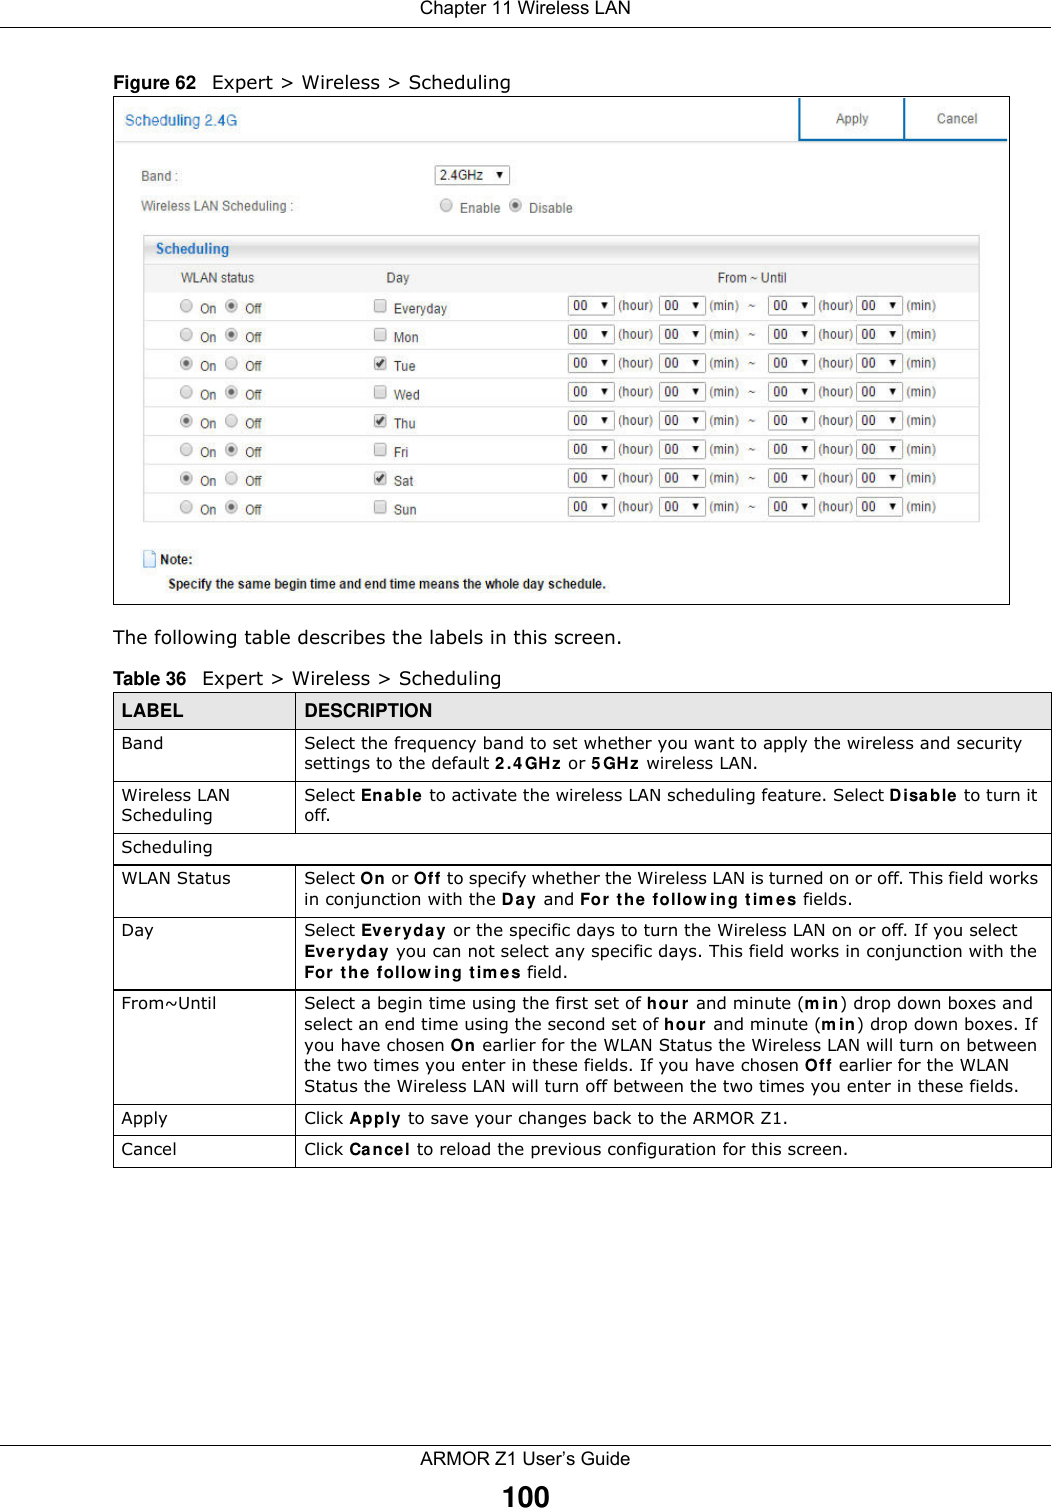 Chapter 11 Wireless LANARMOR Z1 User’s Guide100Figure 62   Expert &gt; Wireless &gt; SchedulingThe following table describes the labels in this screen.Table 36   Expert &gt; Wireless &gt; SchedulingLABEL DESCRIPTIONBand Select the frequency band to set whether you want to apply the wireless and security settings to the default 2.4GHz or 5GHz wireless LAN. Wireless LAN SchedulingSelect Enable to activate the wireless LAN scheduling feature. Select Disable to turn it off.SchedulingWLAN Status Select On or Off to specify whether the Wireless LAN is turned on or off. This field works in conjunction with the Day and For the following times fields.Day Select Everyday or the specific days to turn the Wireless LAN on or off. If you select Everyday you can not select any specific days. This field works in conjunction with the For the following times field.From~Until Select a begin time using the first set of hour and minute (min) drop down boxes and select an end time using the second set of hour and minute (min) drop down boxes. If you have chosen On earlier for the WLAN Status the Wireless LAN will turn on between the two times you enter in these fields. If you have chosen Off earlier for the WLAN Status the Wireless LAN will turn off between the two times you enter in these fields. Apply Click Apply to save your changes back to the ARMOR Z1.Cancel Click Cancel to reload the previous configuration for this screen.